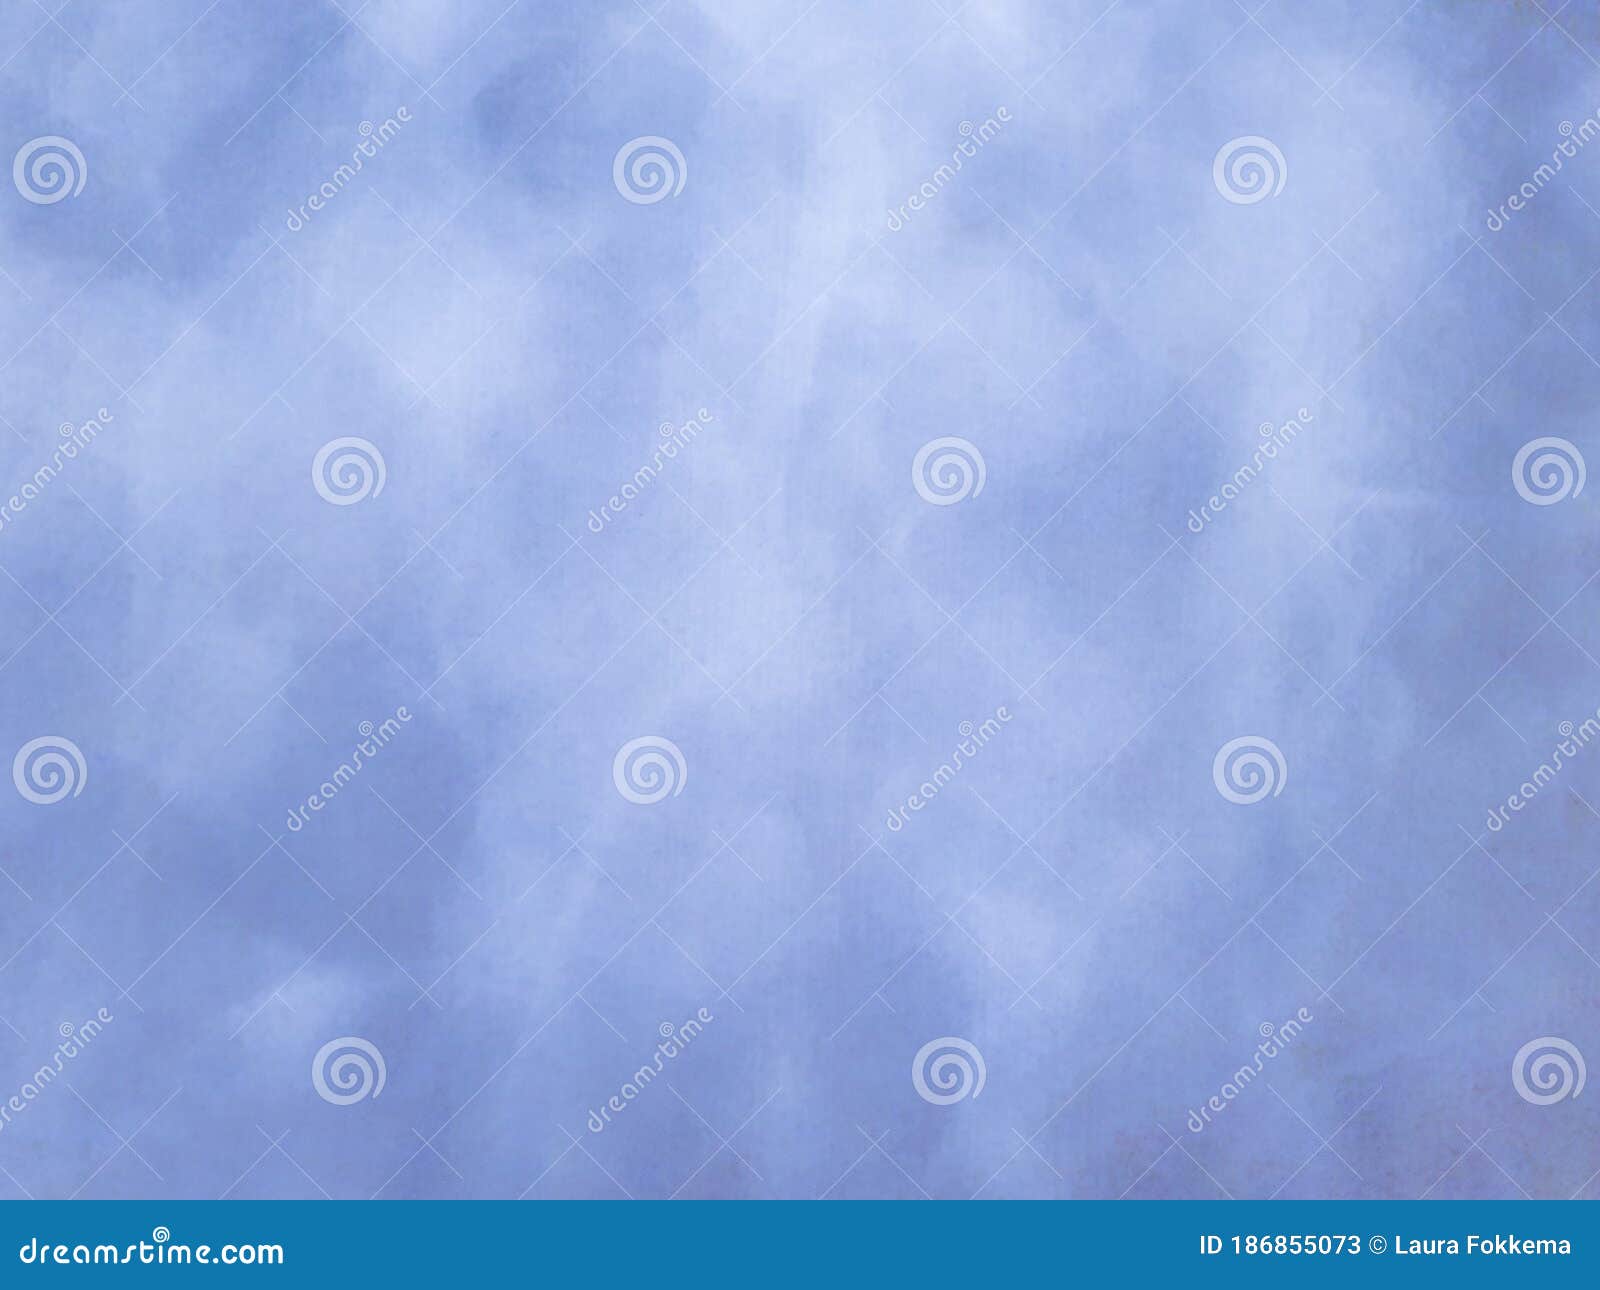 Blue wallpaper backdrop stock image. Image of page, paper - 186855073